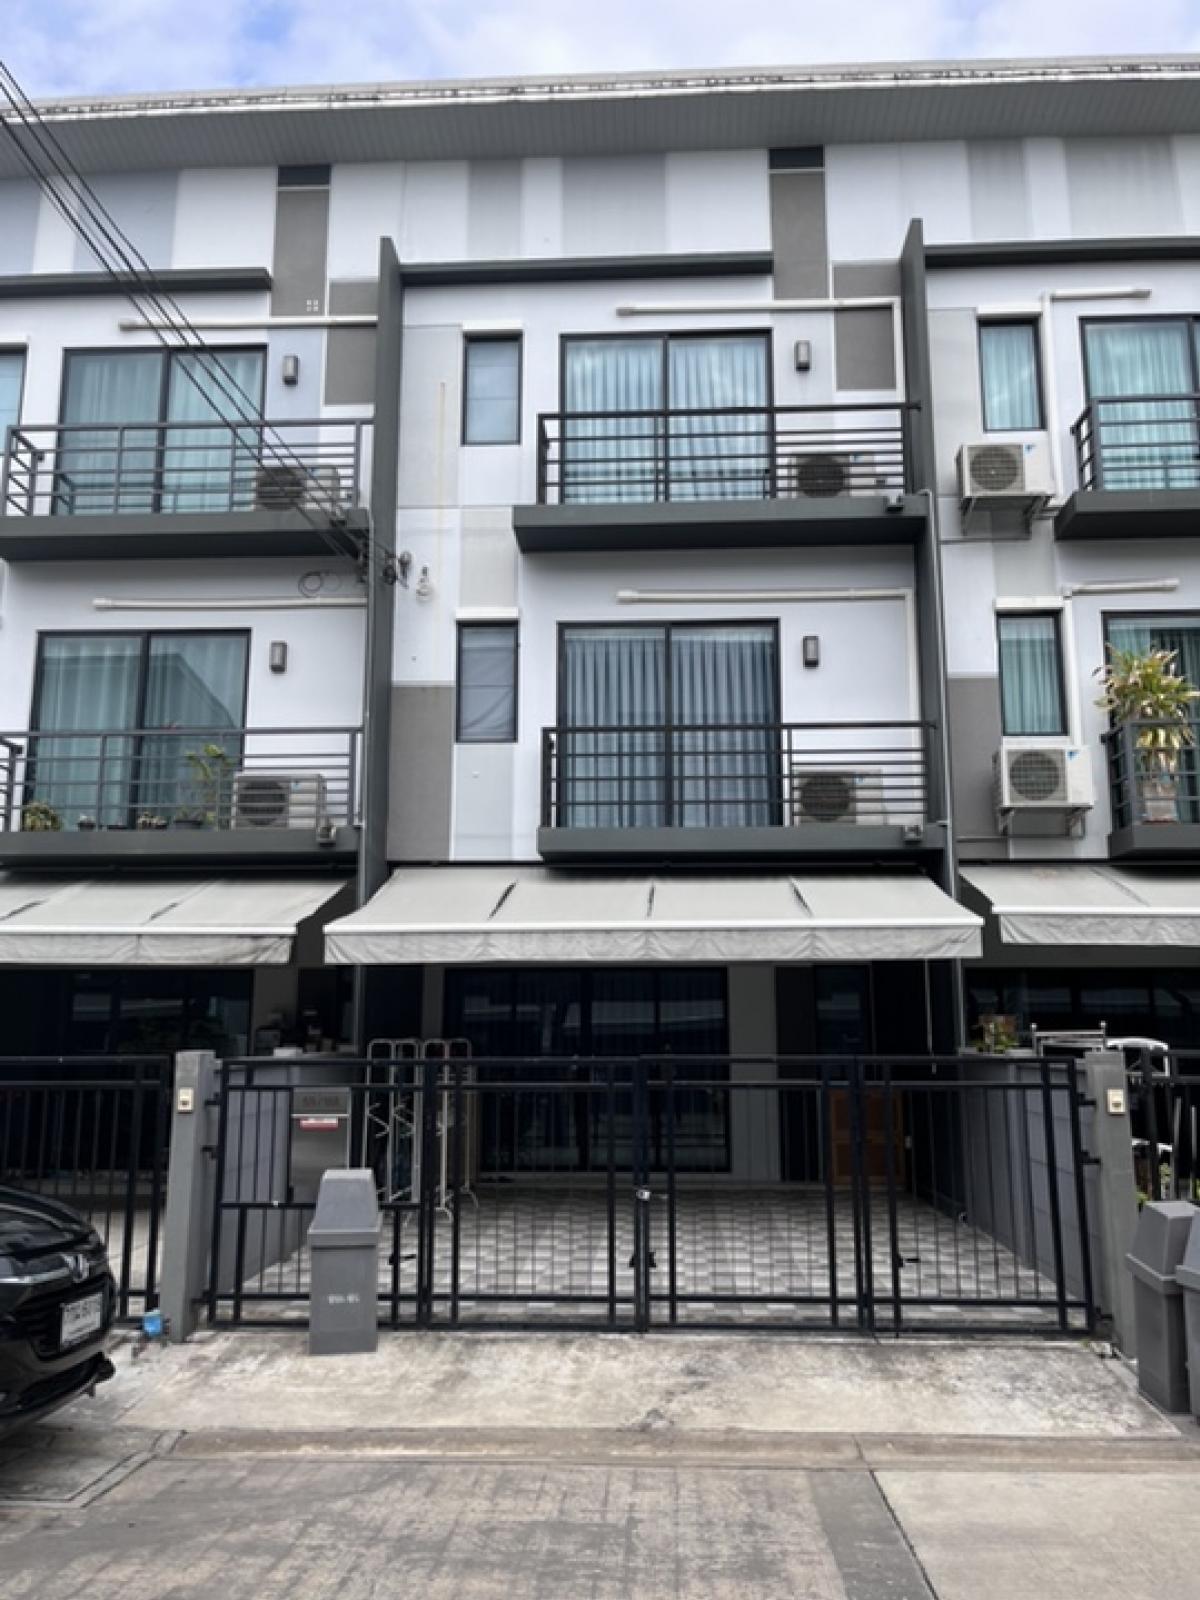 For RentTownhouseRathburana, Suksawat : Townhome for rent, Baan Klang Muang, Suksawat, beautiful decoration, fully furnished, ready to move in.